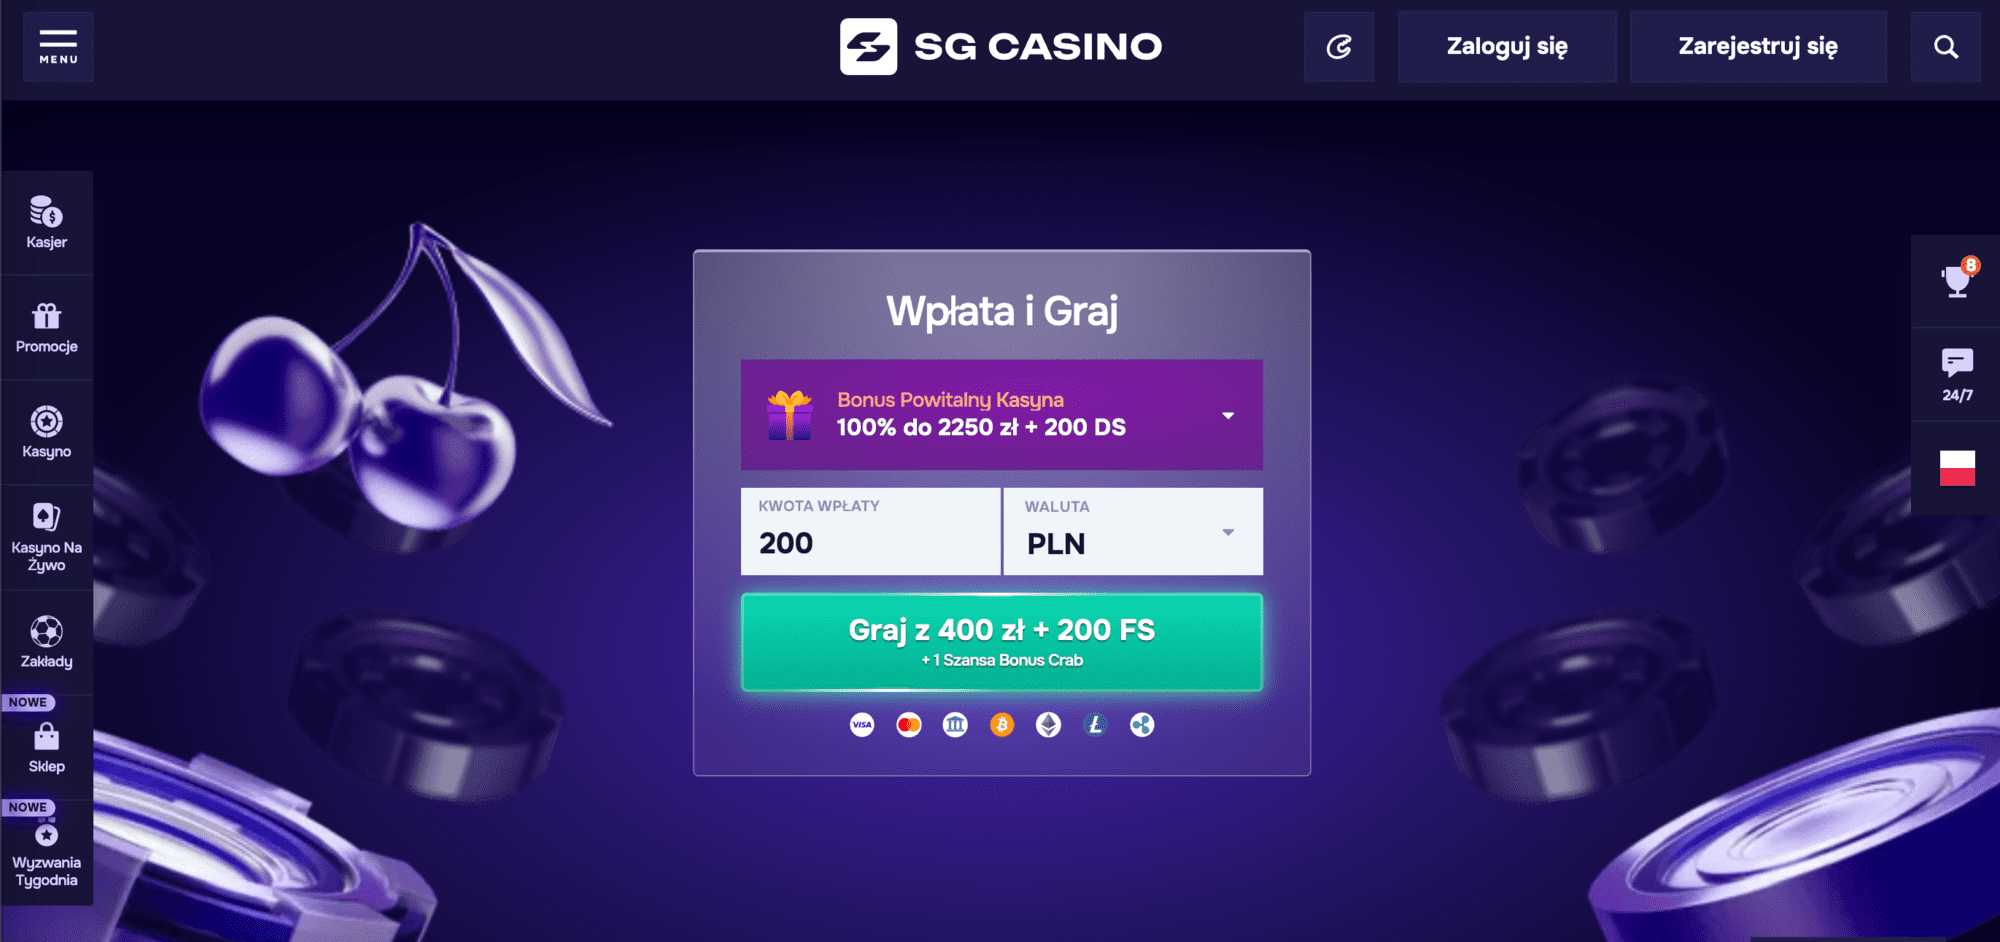 SG Casino homepage of the website